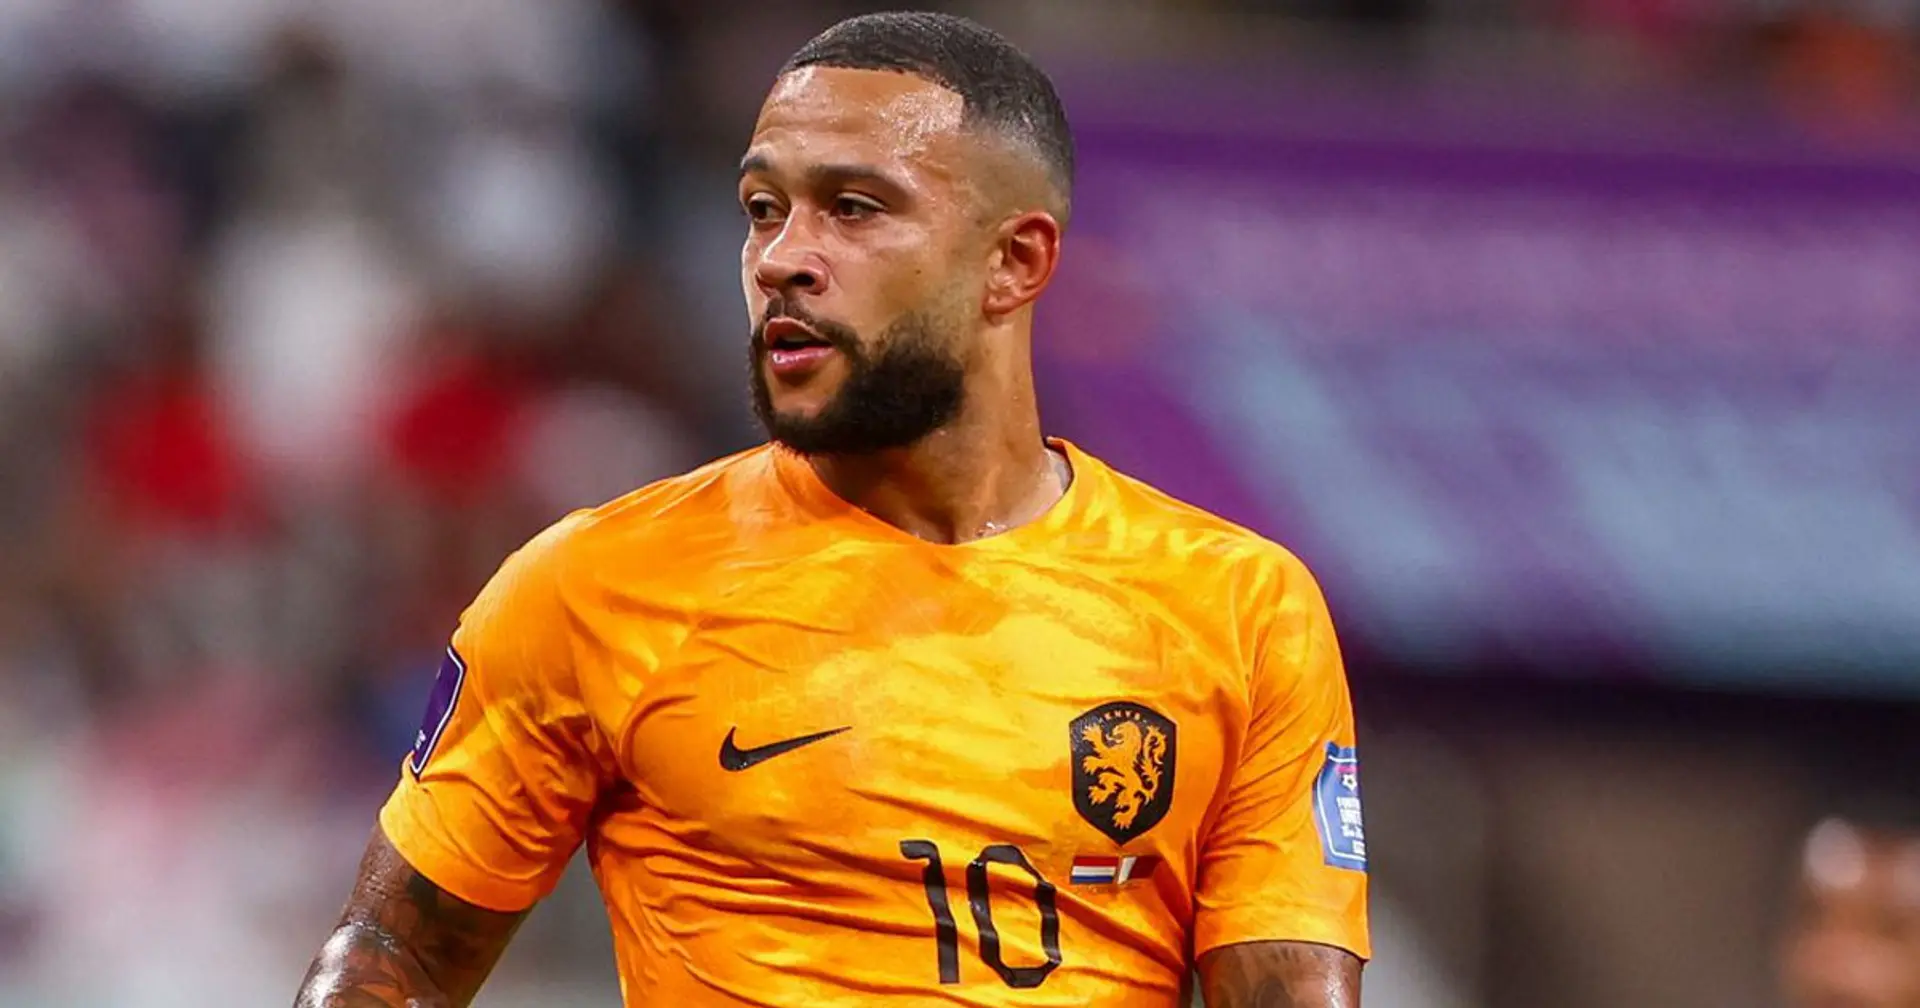 Man United favorites to sign Memphis Depay in January - could get him for low fee (reliability: 4 stars)